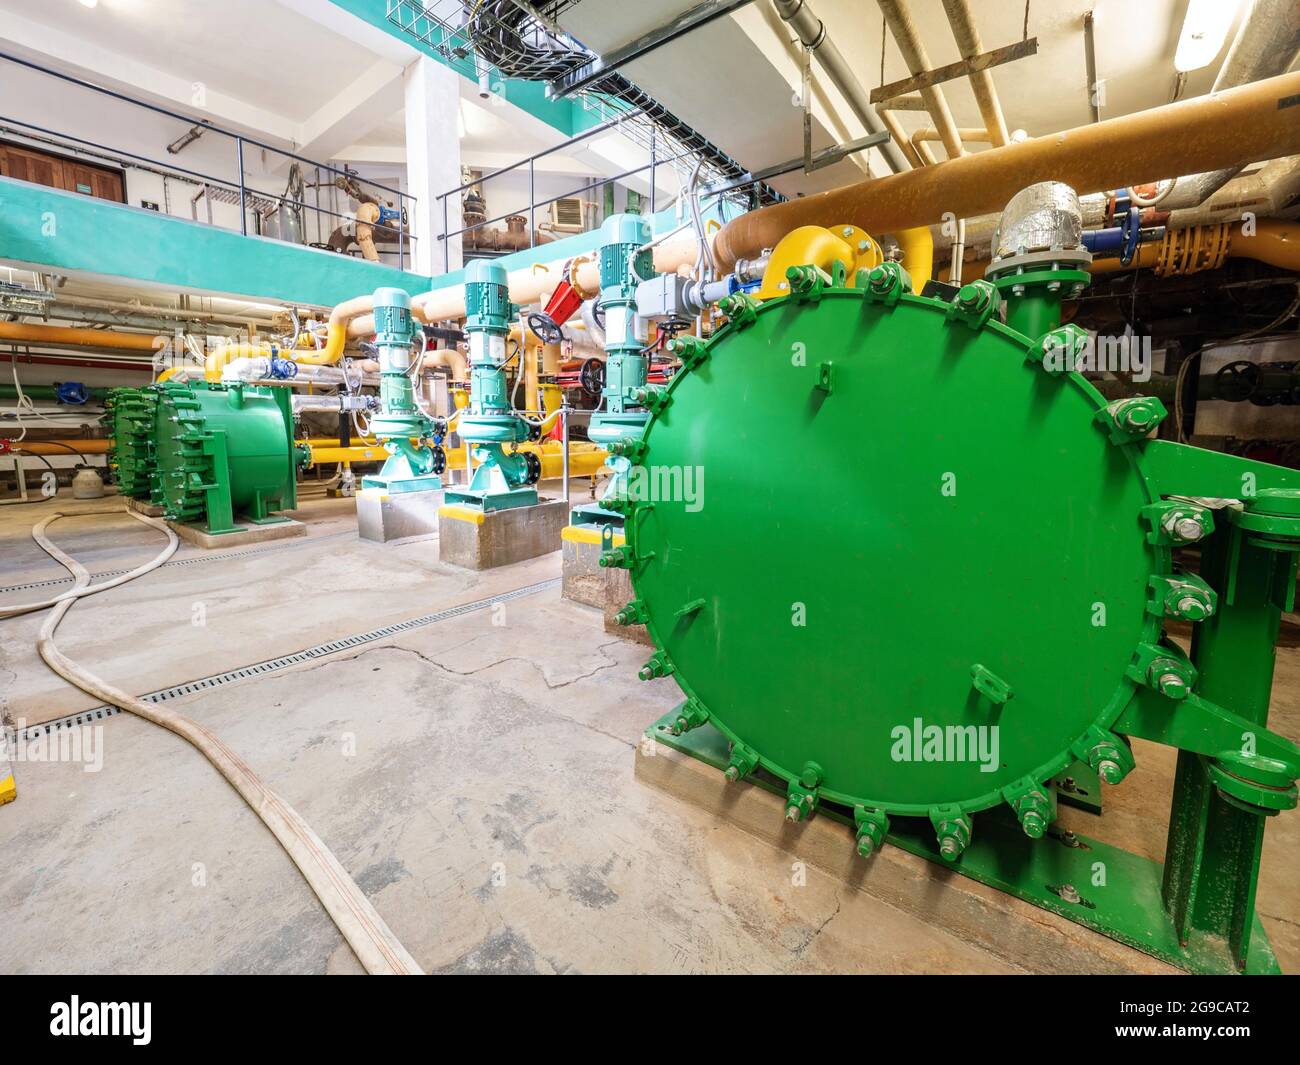 Green water tank. Big heat exchanger in an industrial cellar. Lots of pipes and pumps. Stock Photo